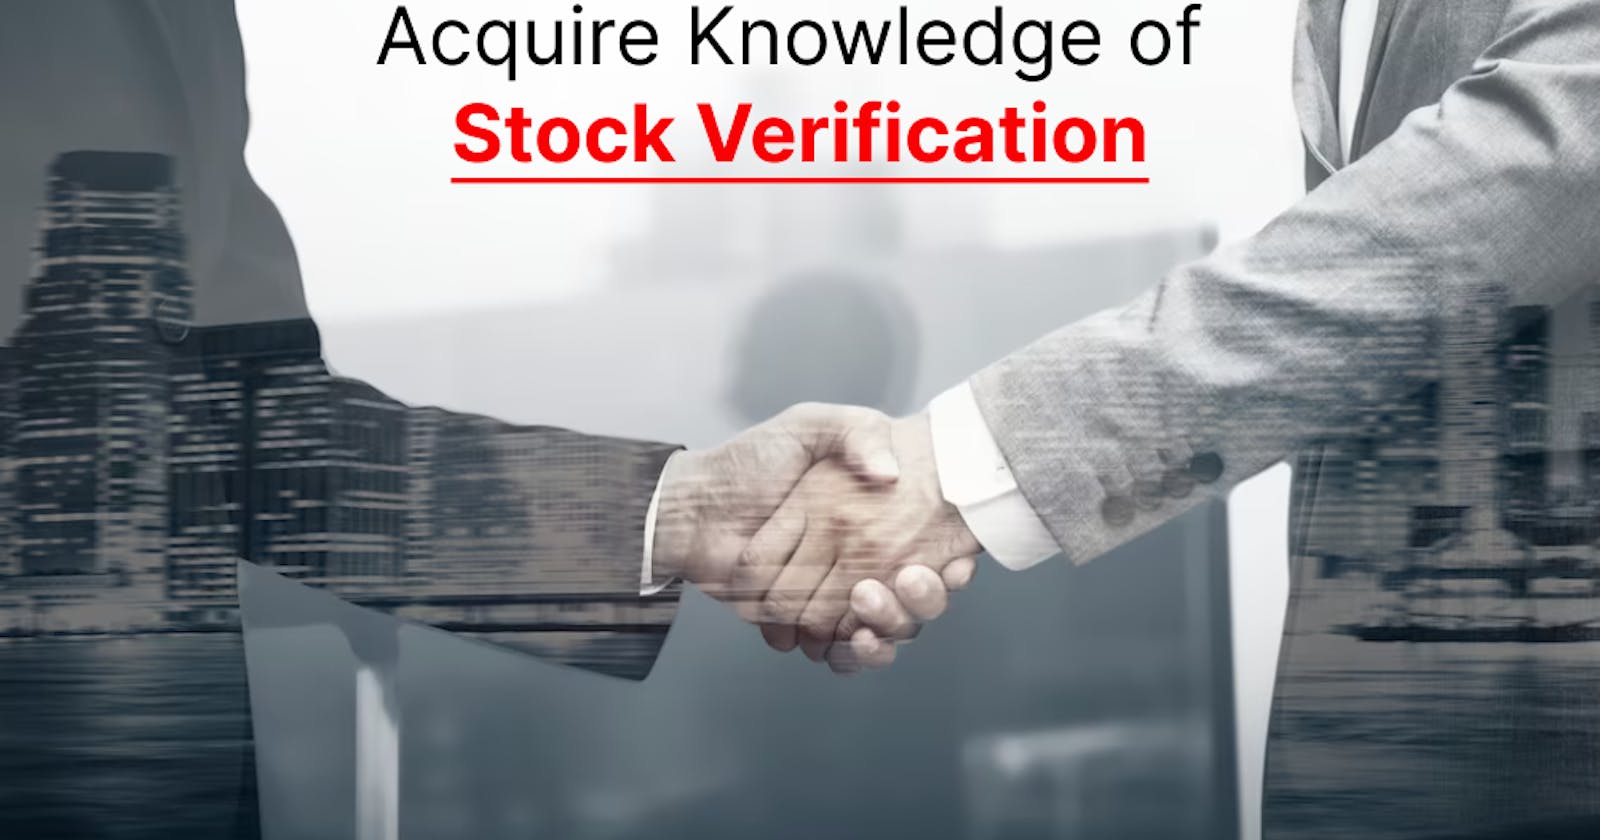 Acquire Knowledge of Stock Verification